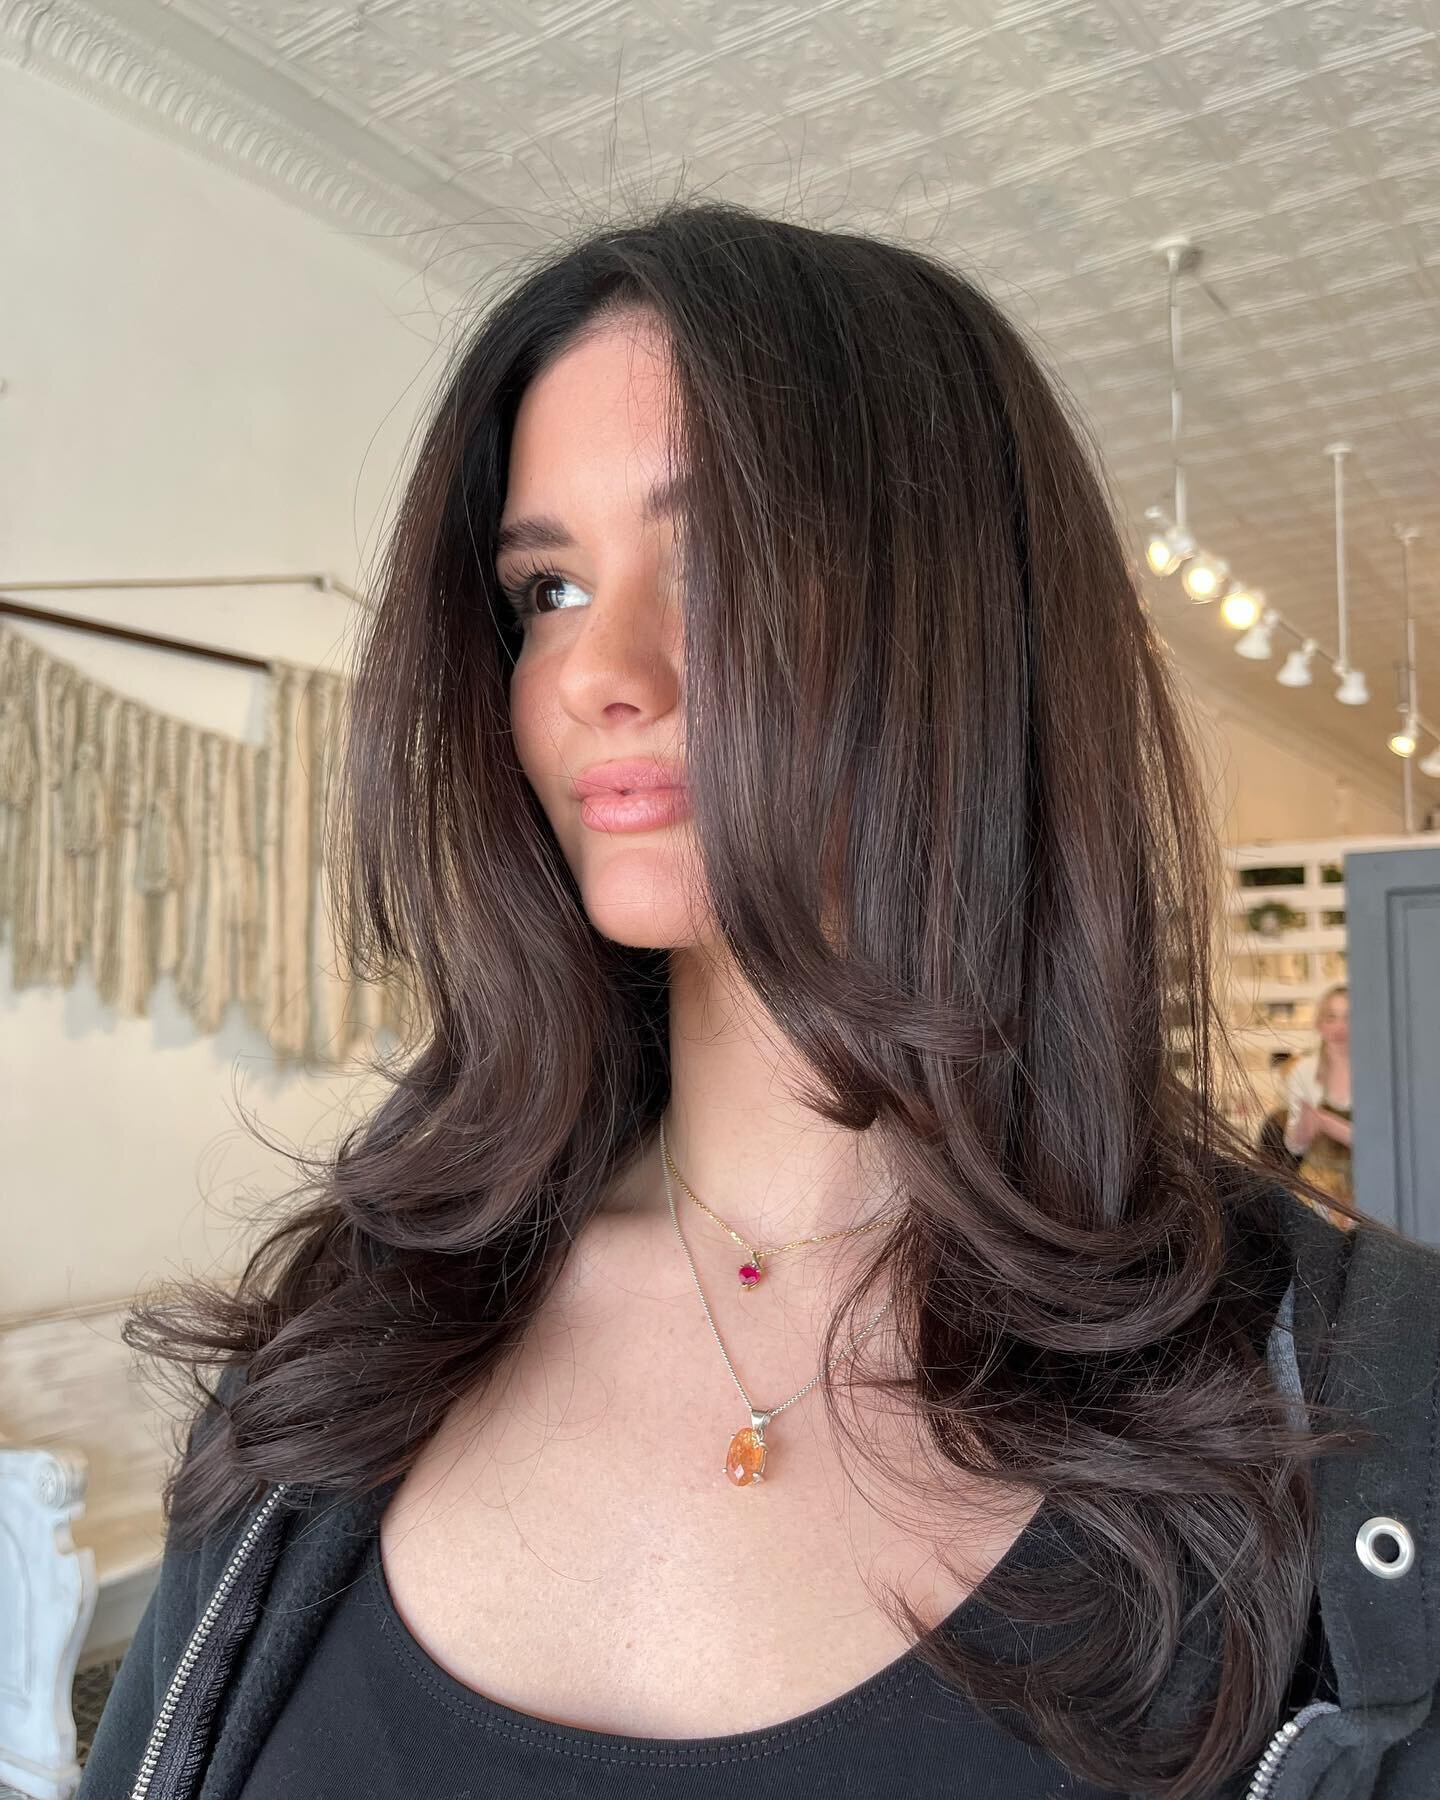 Life isn&rsquo;t perfect, but your hair can be 💇🏻&zwj;♀️
by @lilysharpstylist 

&bull;
.
.
#dandyhair #dandelionsalon #nashville #eastnashville #eastnashvillehair #nashville #nashvillehair #nashvillestylist #eastnash #goldwell #goldwellcolor #redke